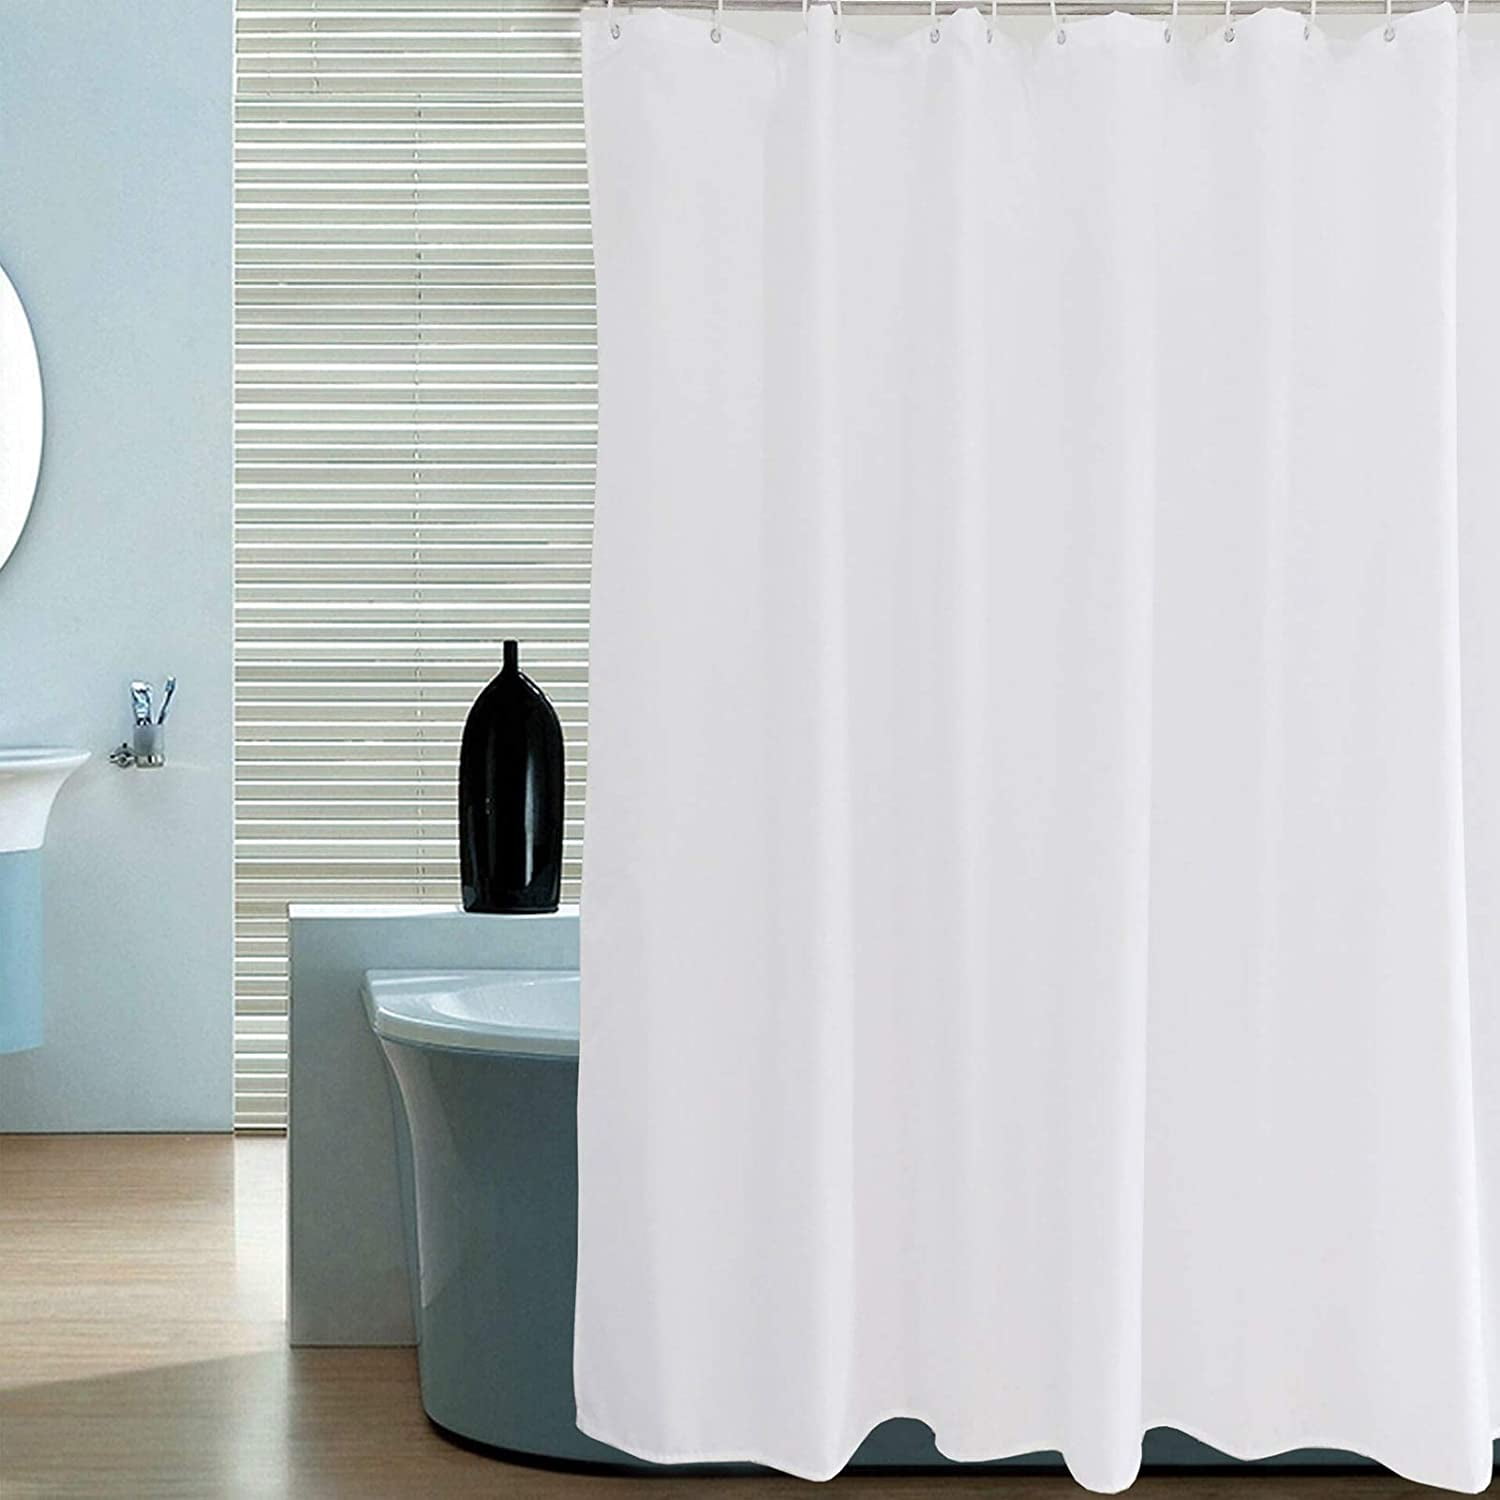 Pit Planet Waterproof Bathroom Polyester Shower Curtain Liner Water Resistant 